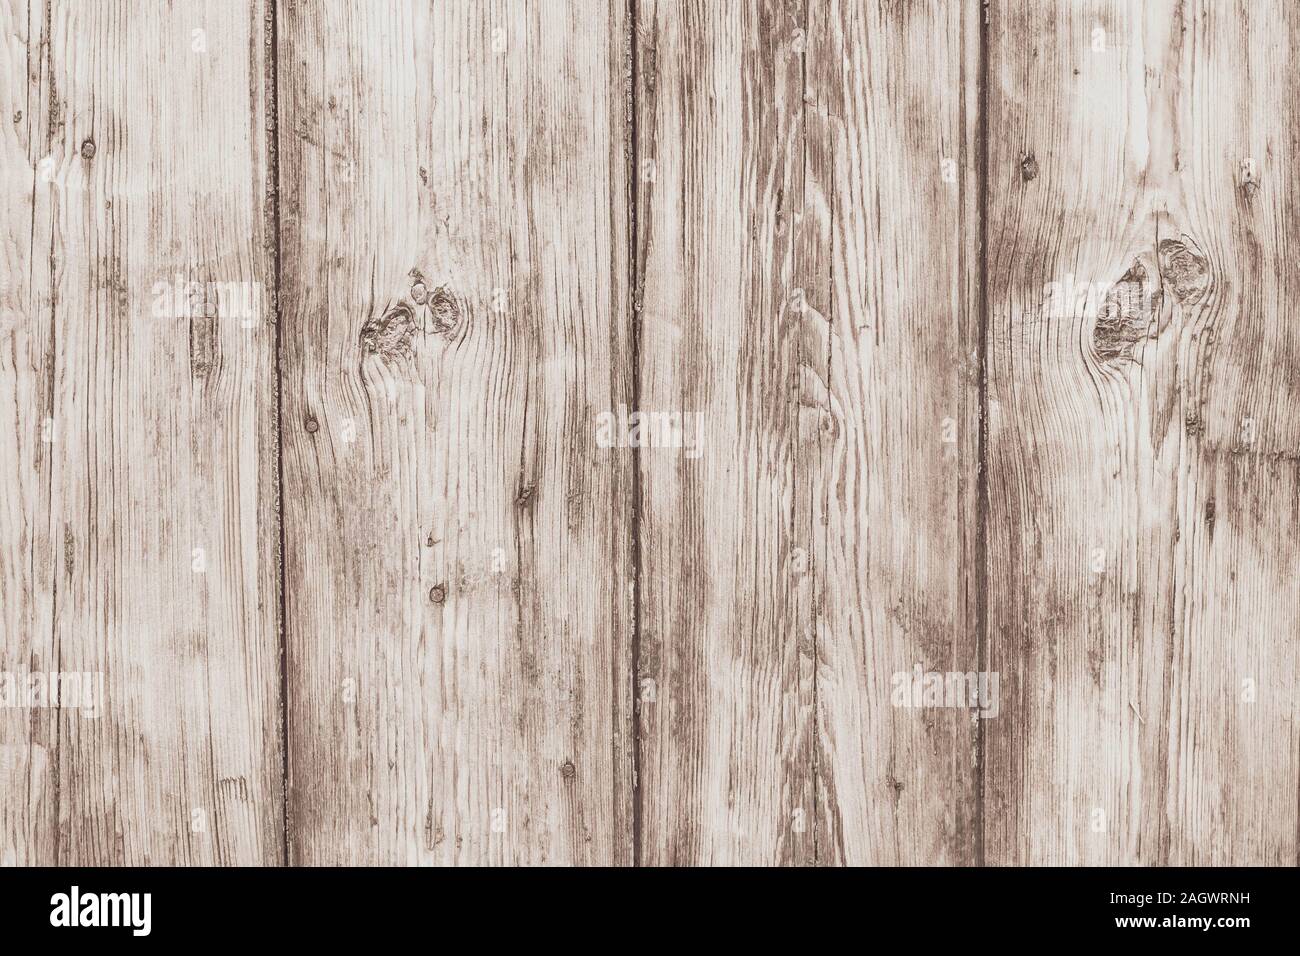 Light wood fence. Texture of wooden boards. Antique oak boards. Plank - timber. Vintage wooden desk, surface. Natural color. Old wood shabby planks. R Stock Photo